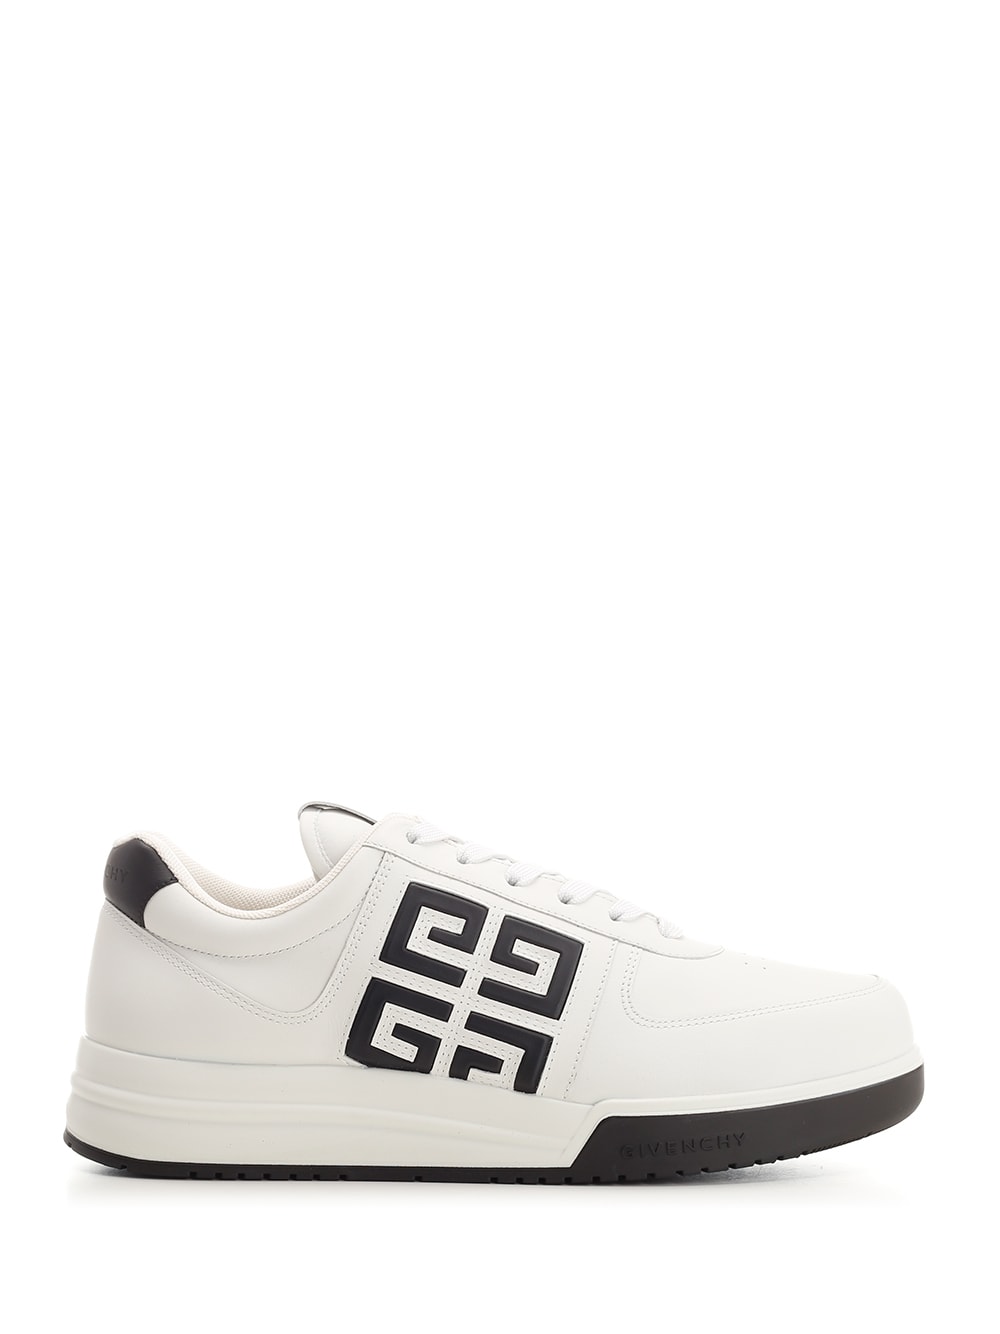 Givenchy White/black G4 Sneakers